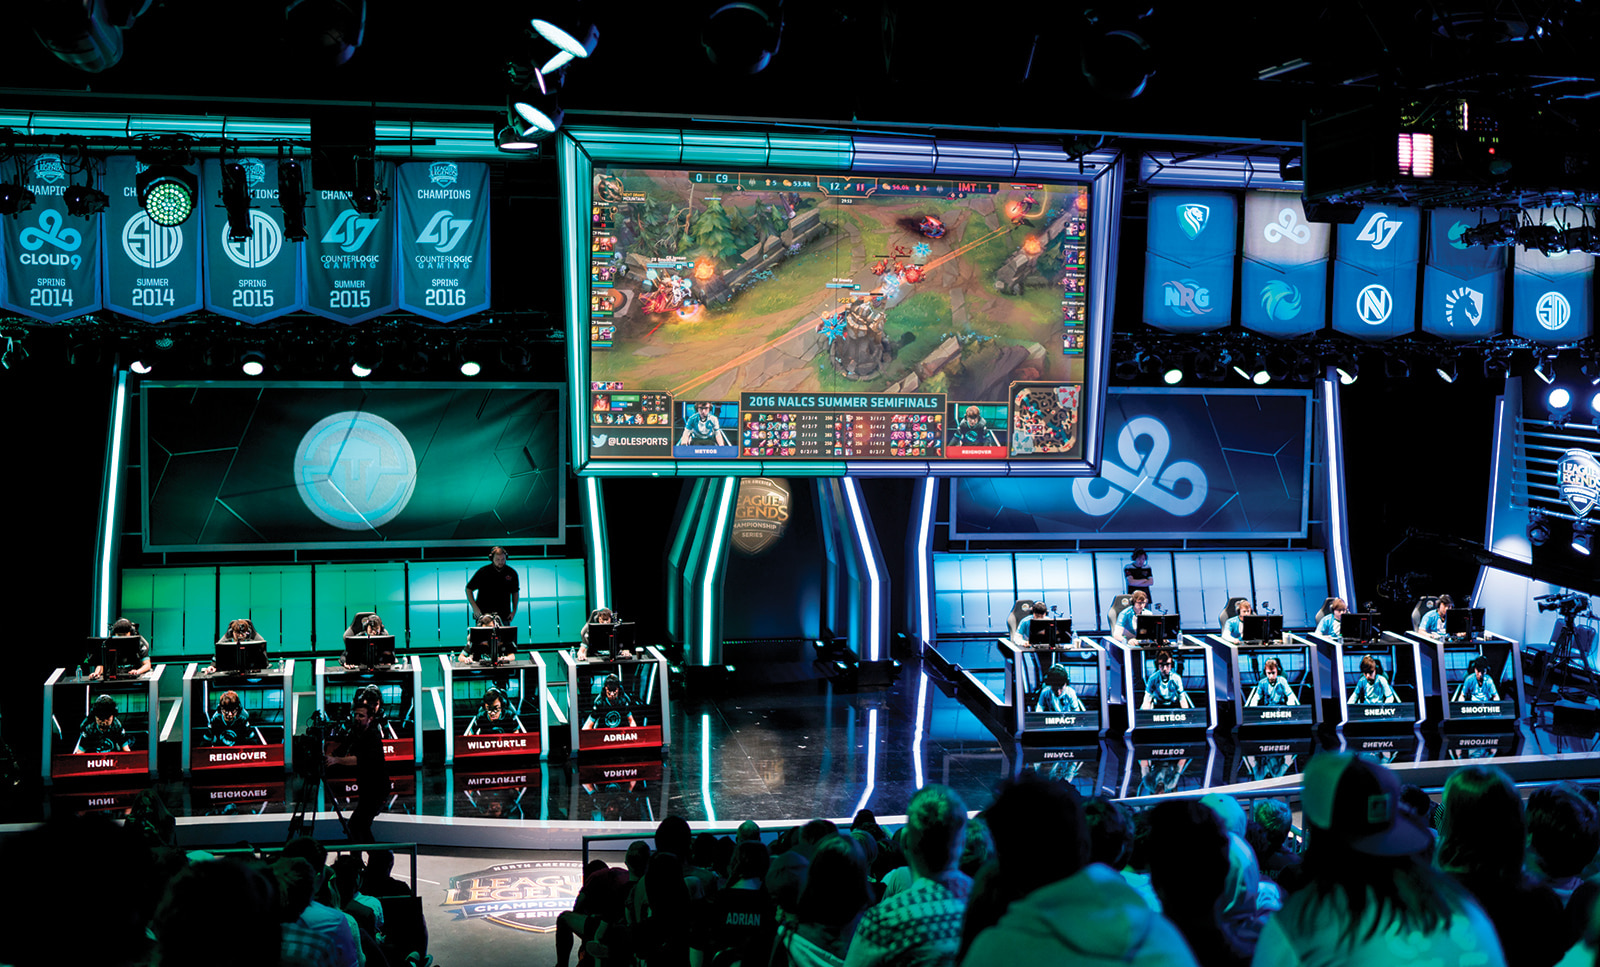 Cloud9 takes on Immortals in the 2016 Summer Semifinals of the North American League of Legends Championship Series (NA LCS) Summer Split at the NA LCS Studio in Los Angeles, California.